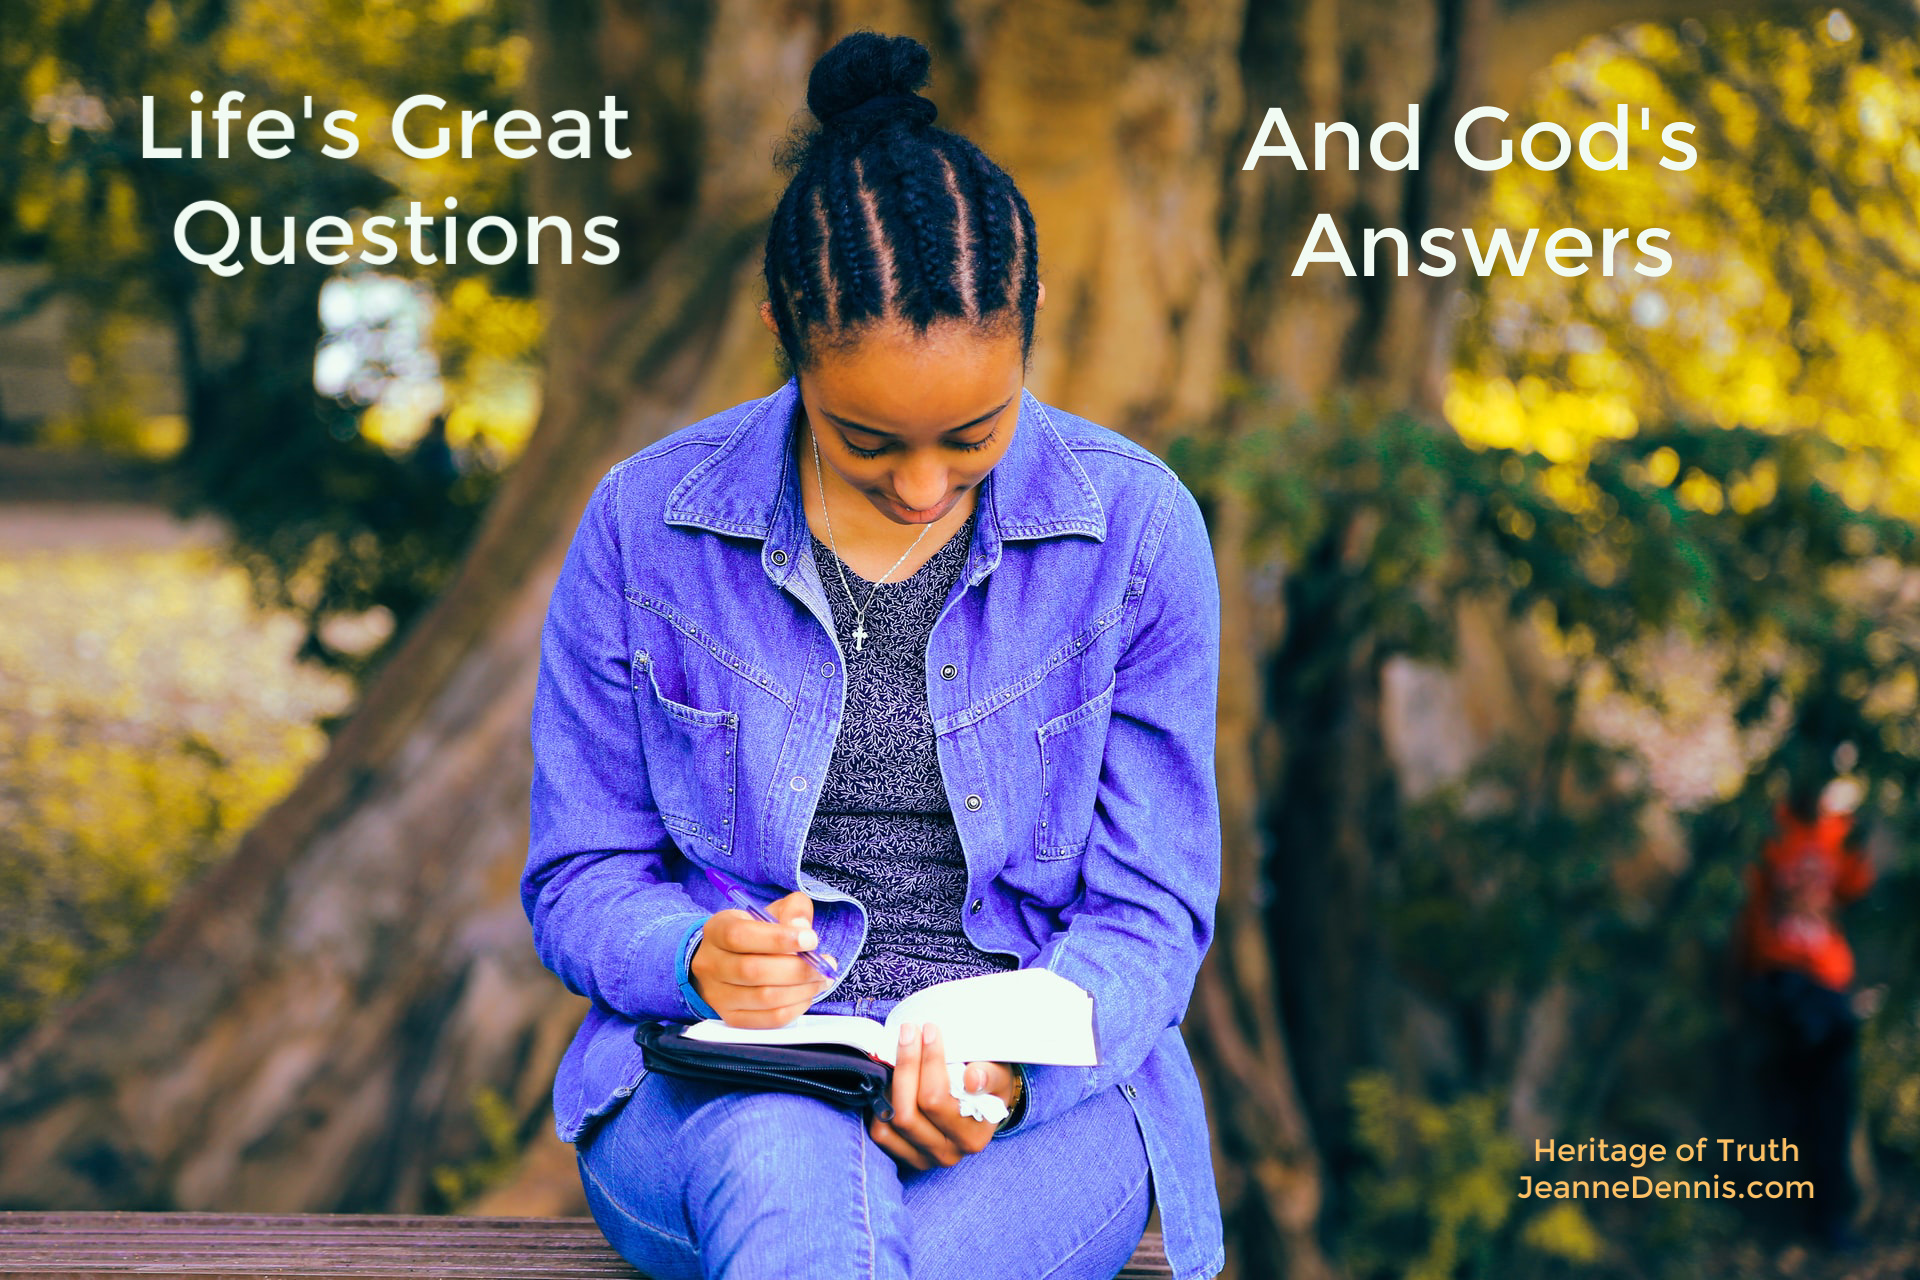 Life's Great Questions and God's Answers, Heritage of Truth, JeanneDennis.com Girl reading Bible